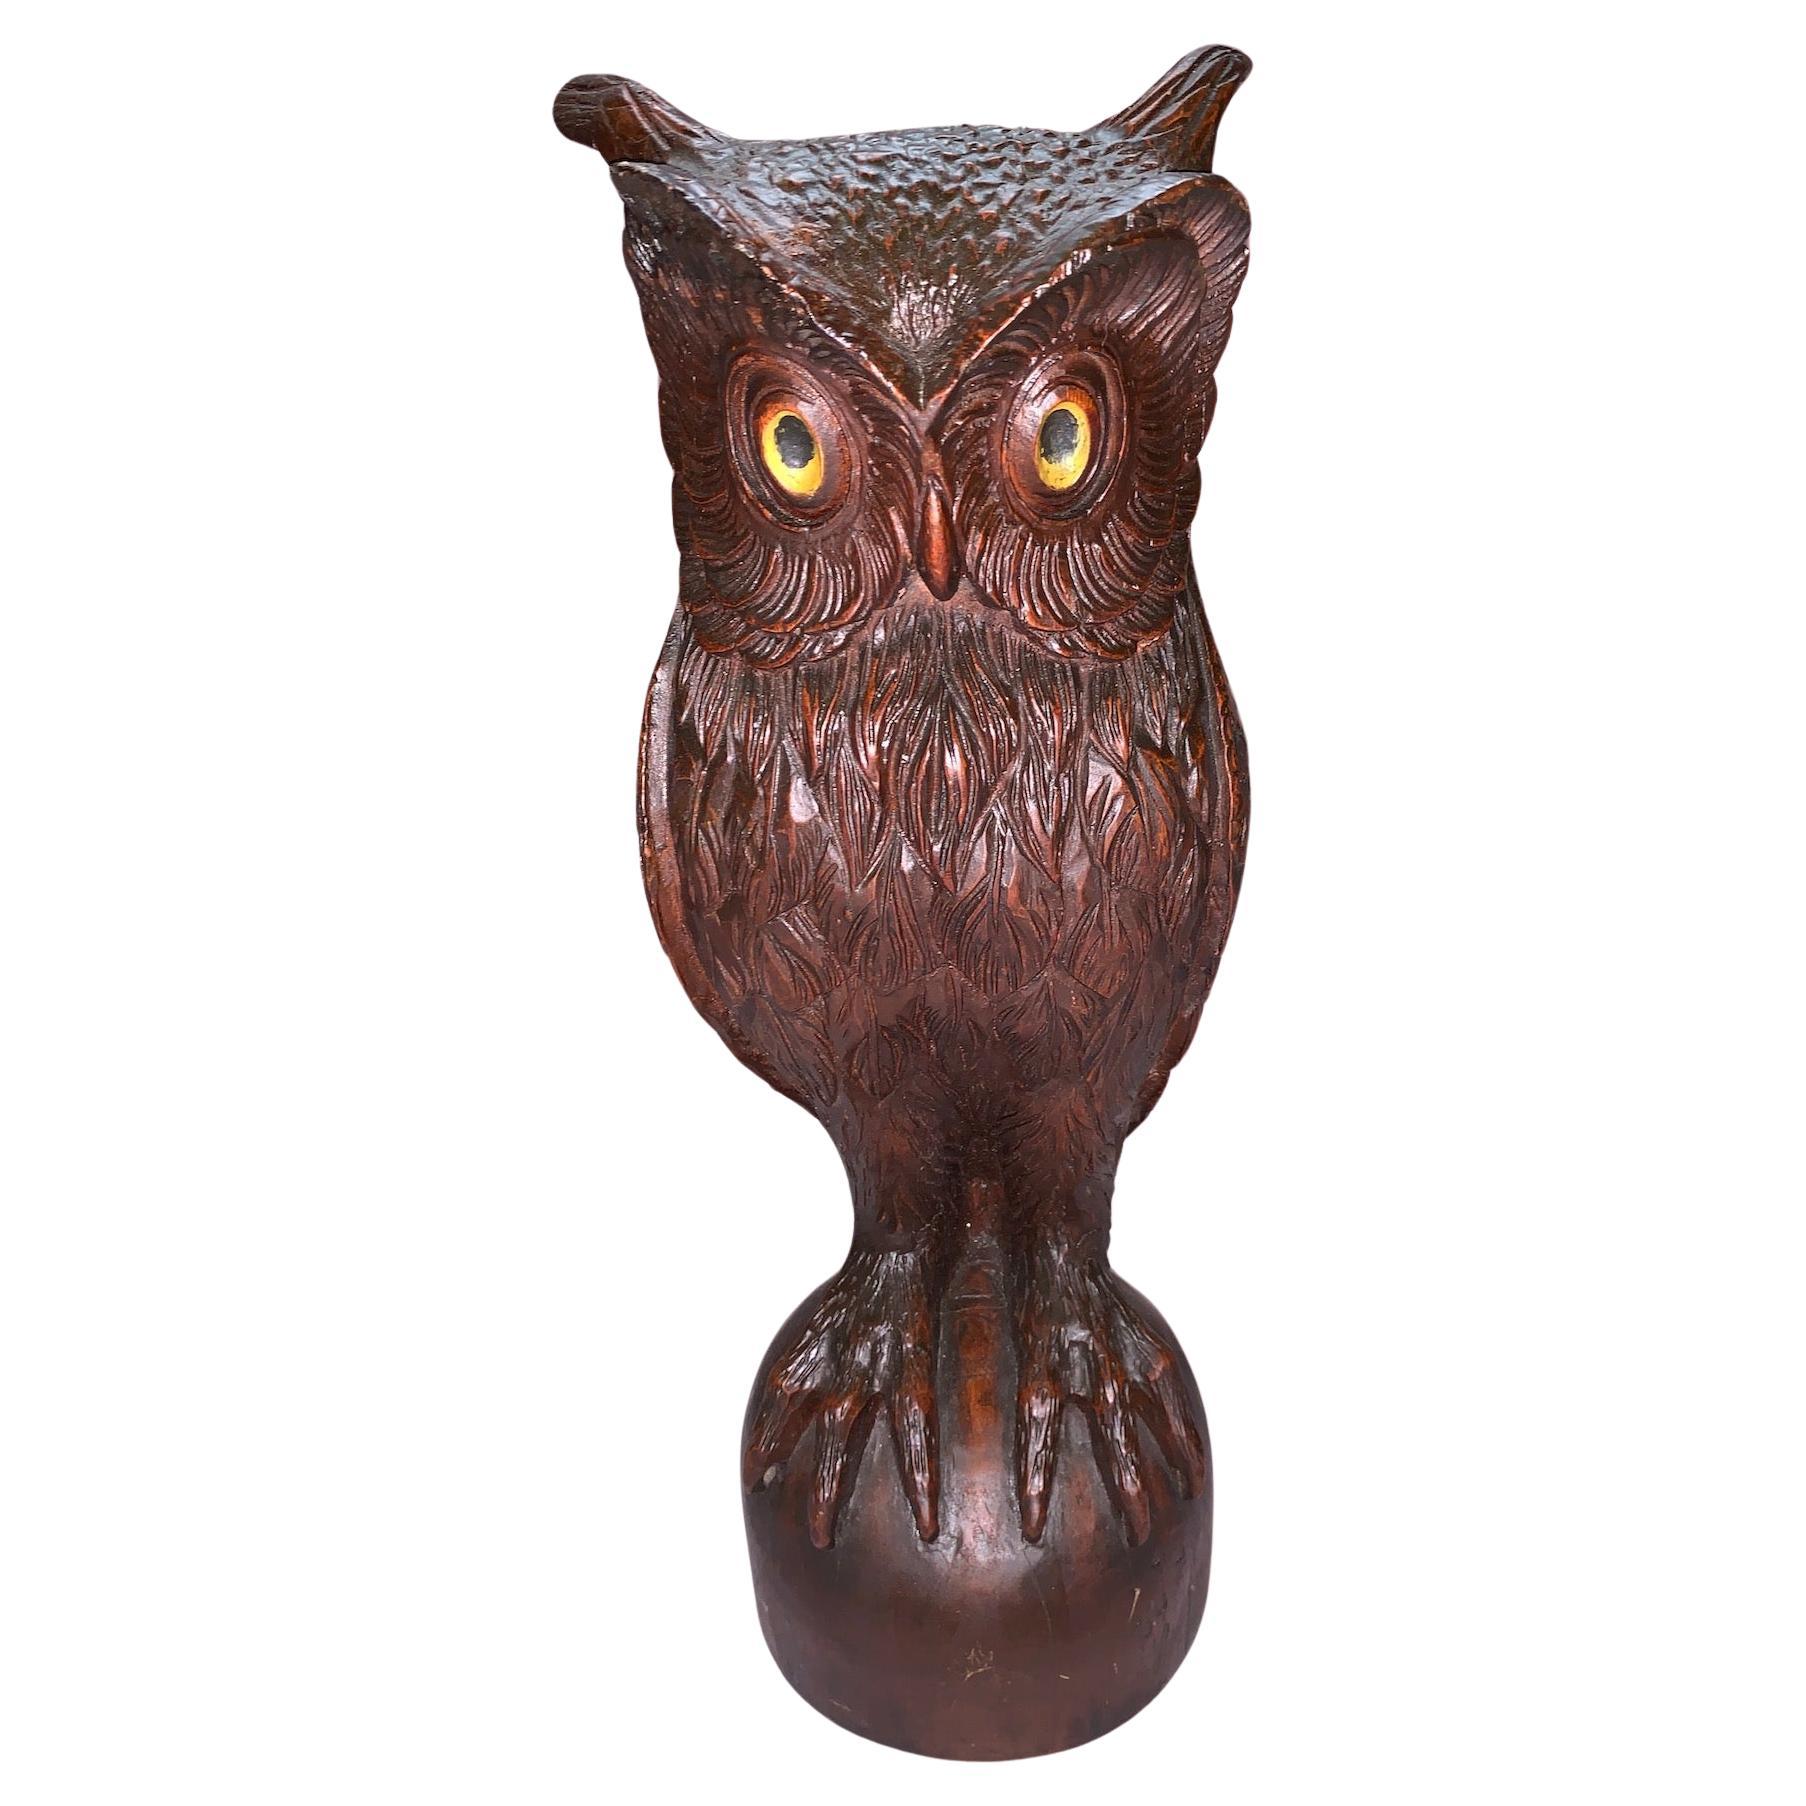 A Carved Wooden Owl Statue For Sale